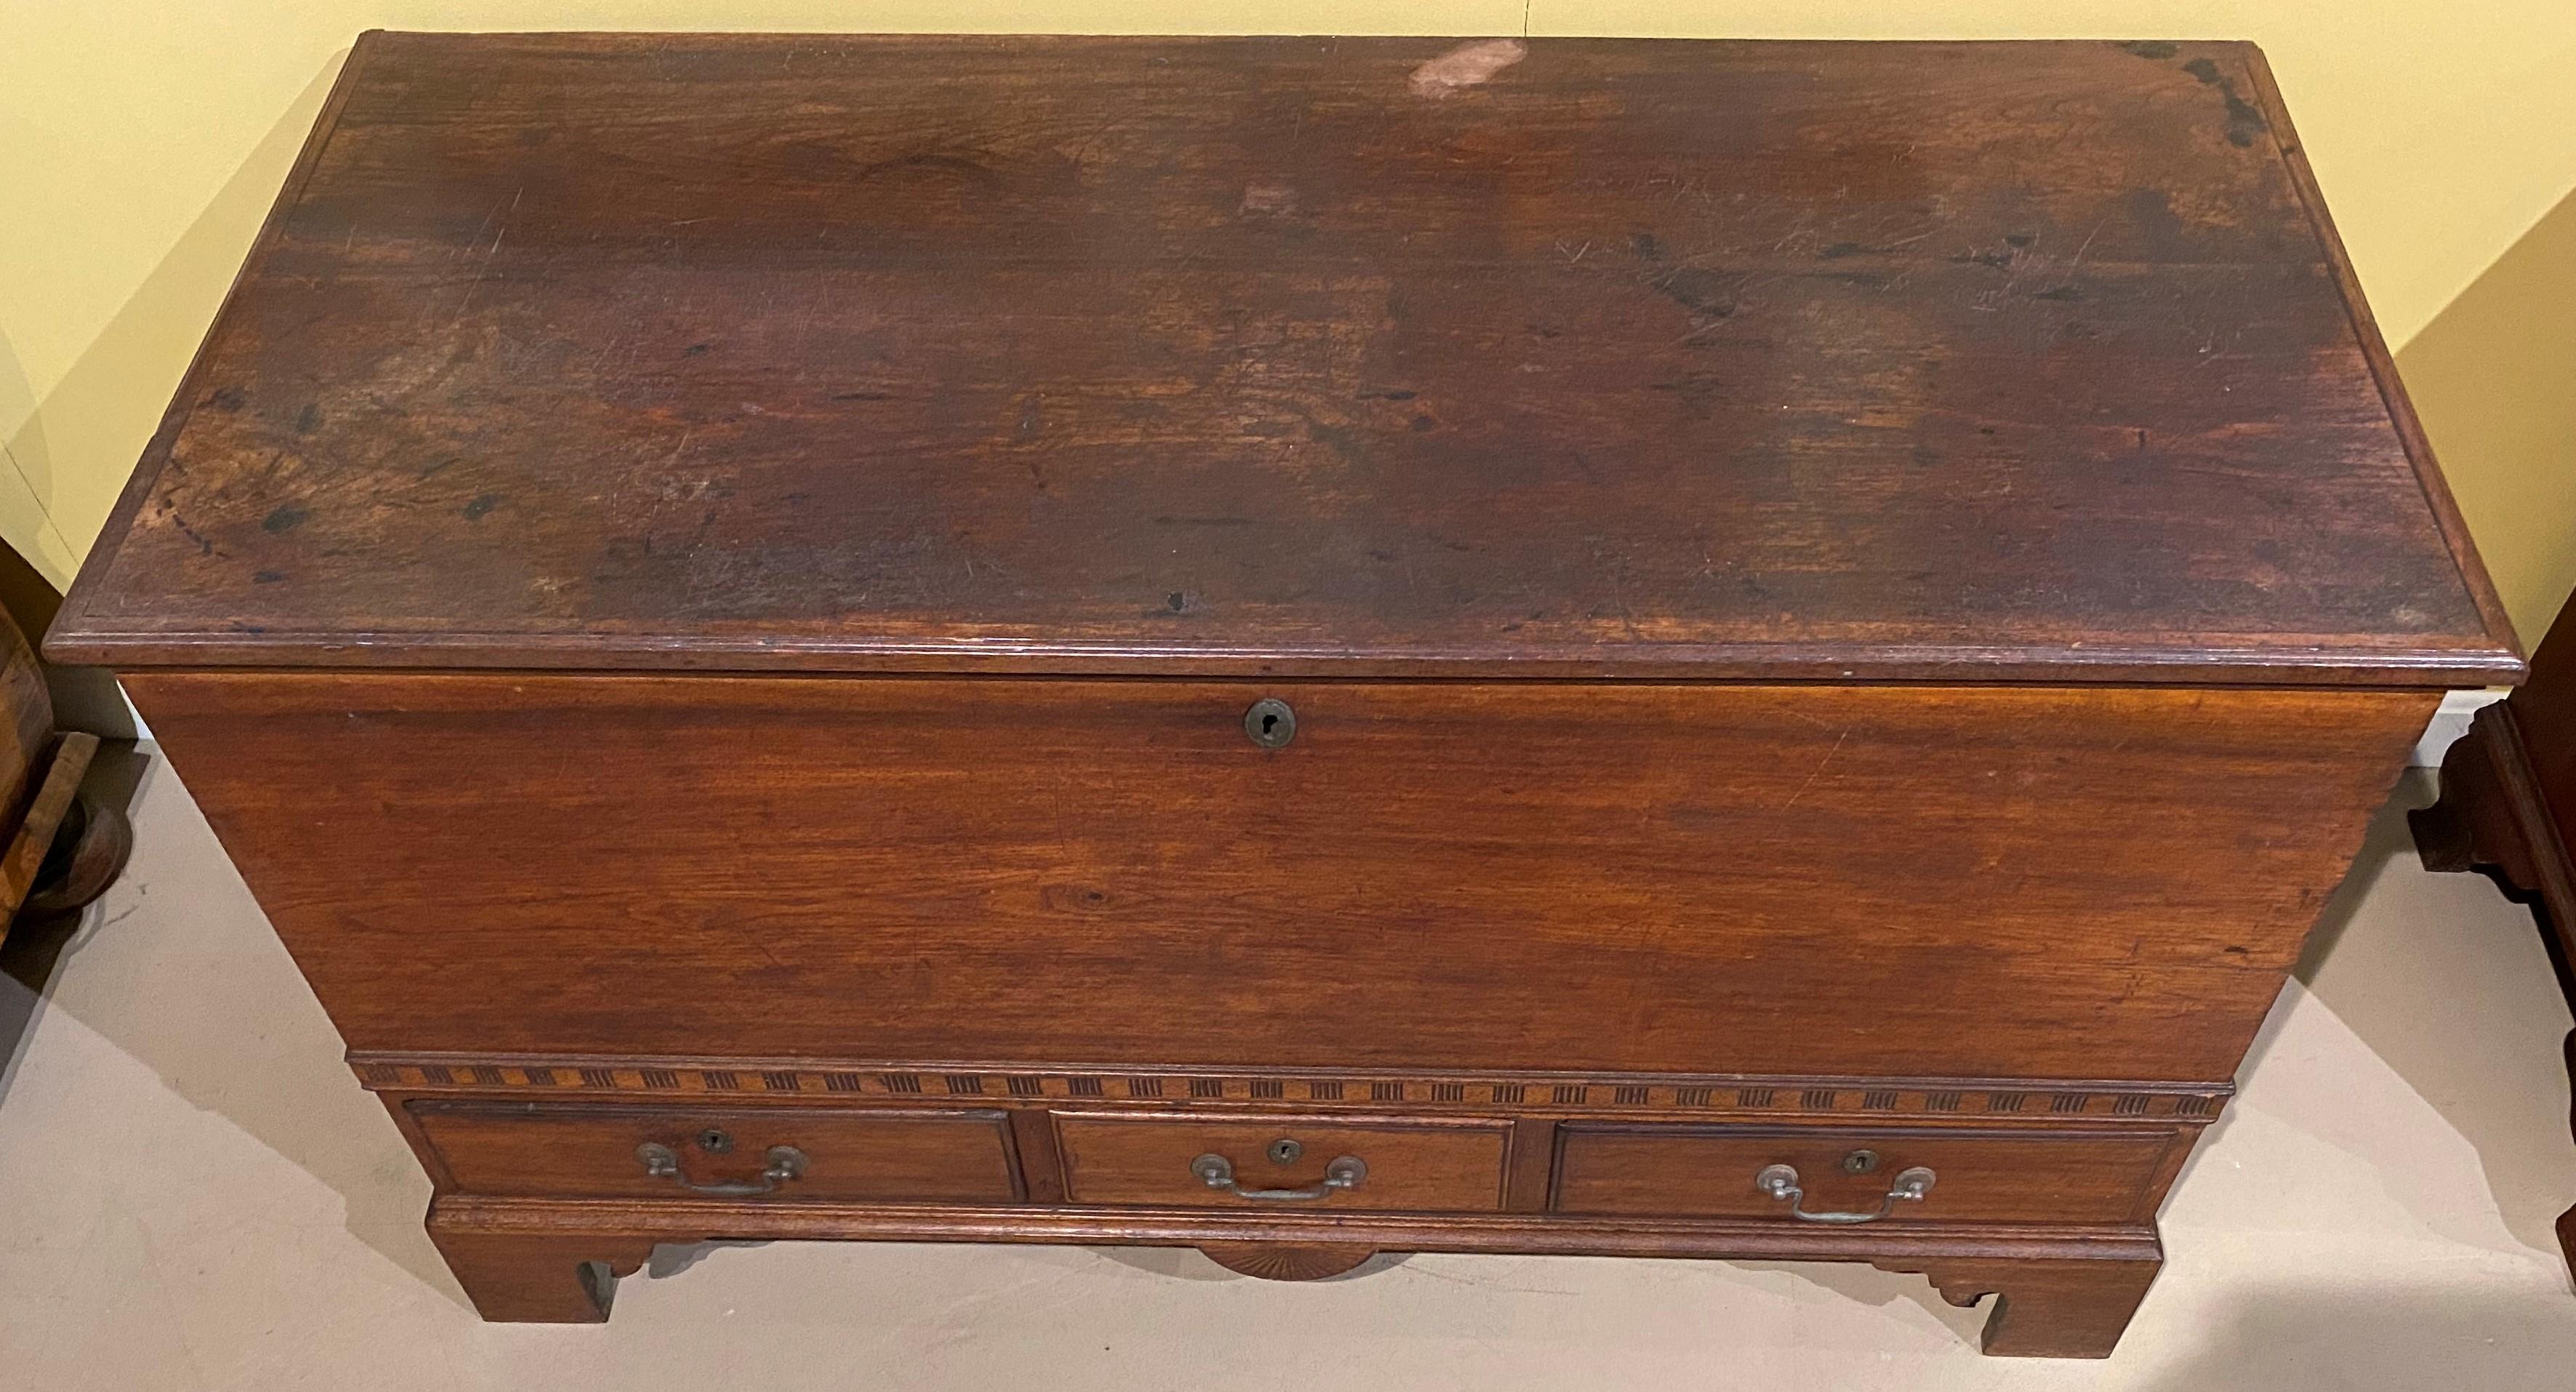 A fine example of a country walnut country blanket or dower chest with three fitted drawers, an interior till in old red, dovetailed corners, on a carved bracket base with center carved radial fan drop. A decorative carved band runs around the front